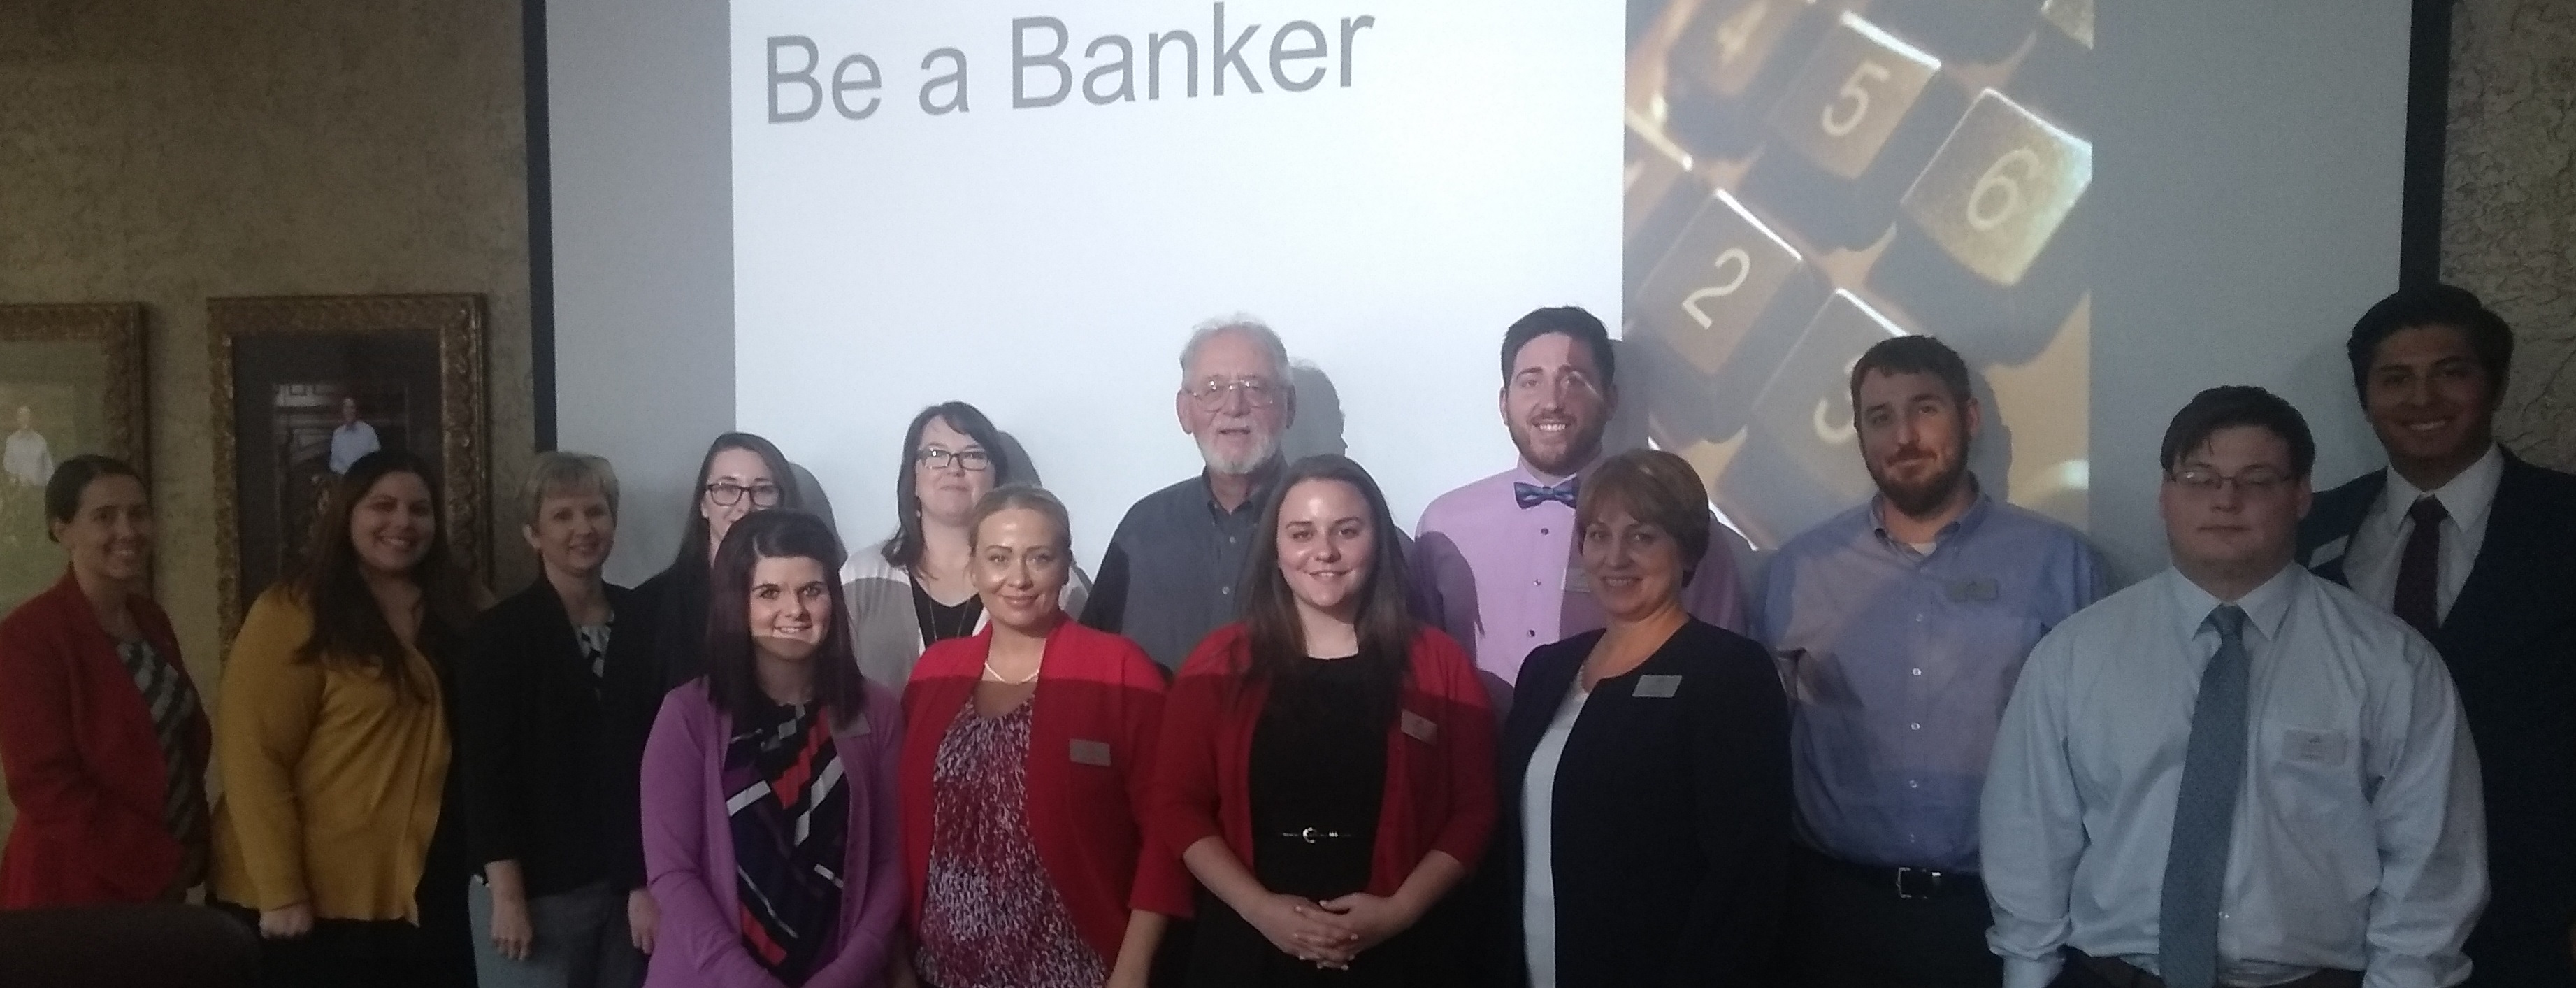 Be a Banker picture